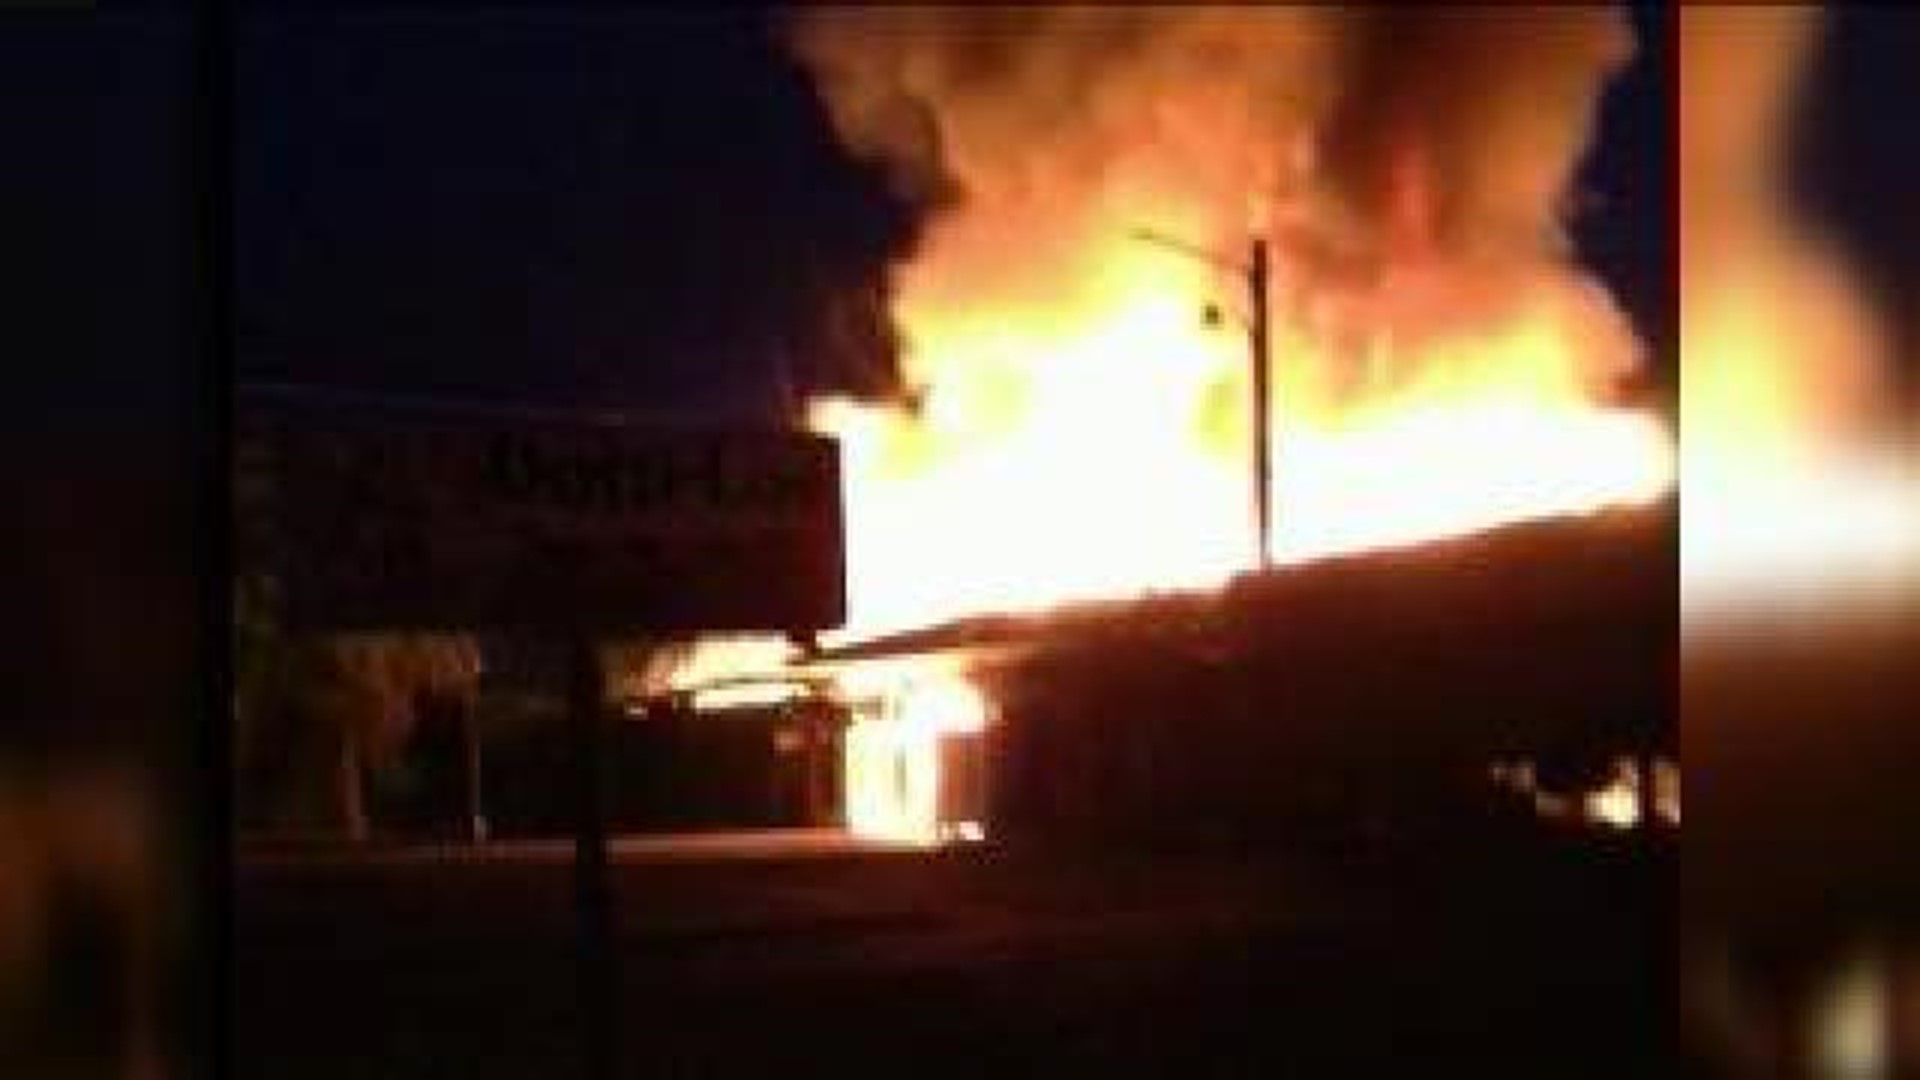 Meat Packing Business Engulfed by Flames